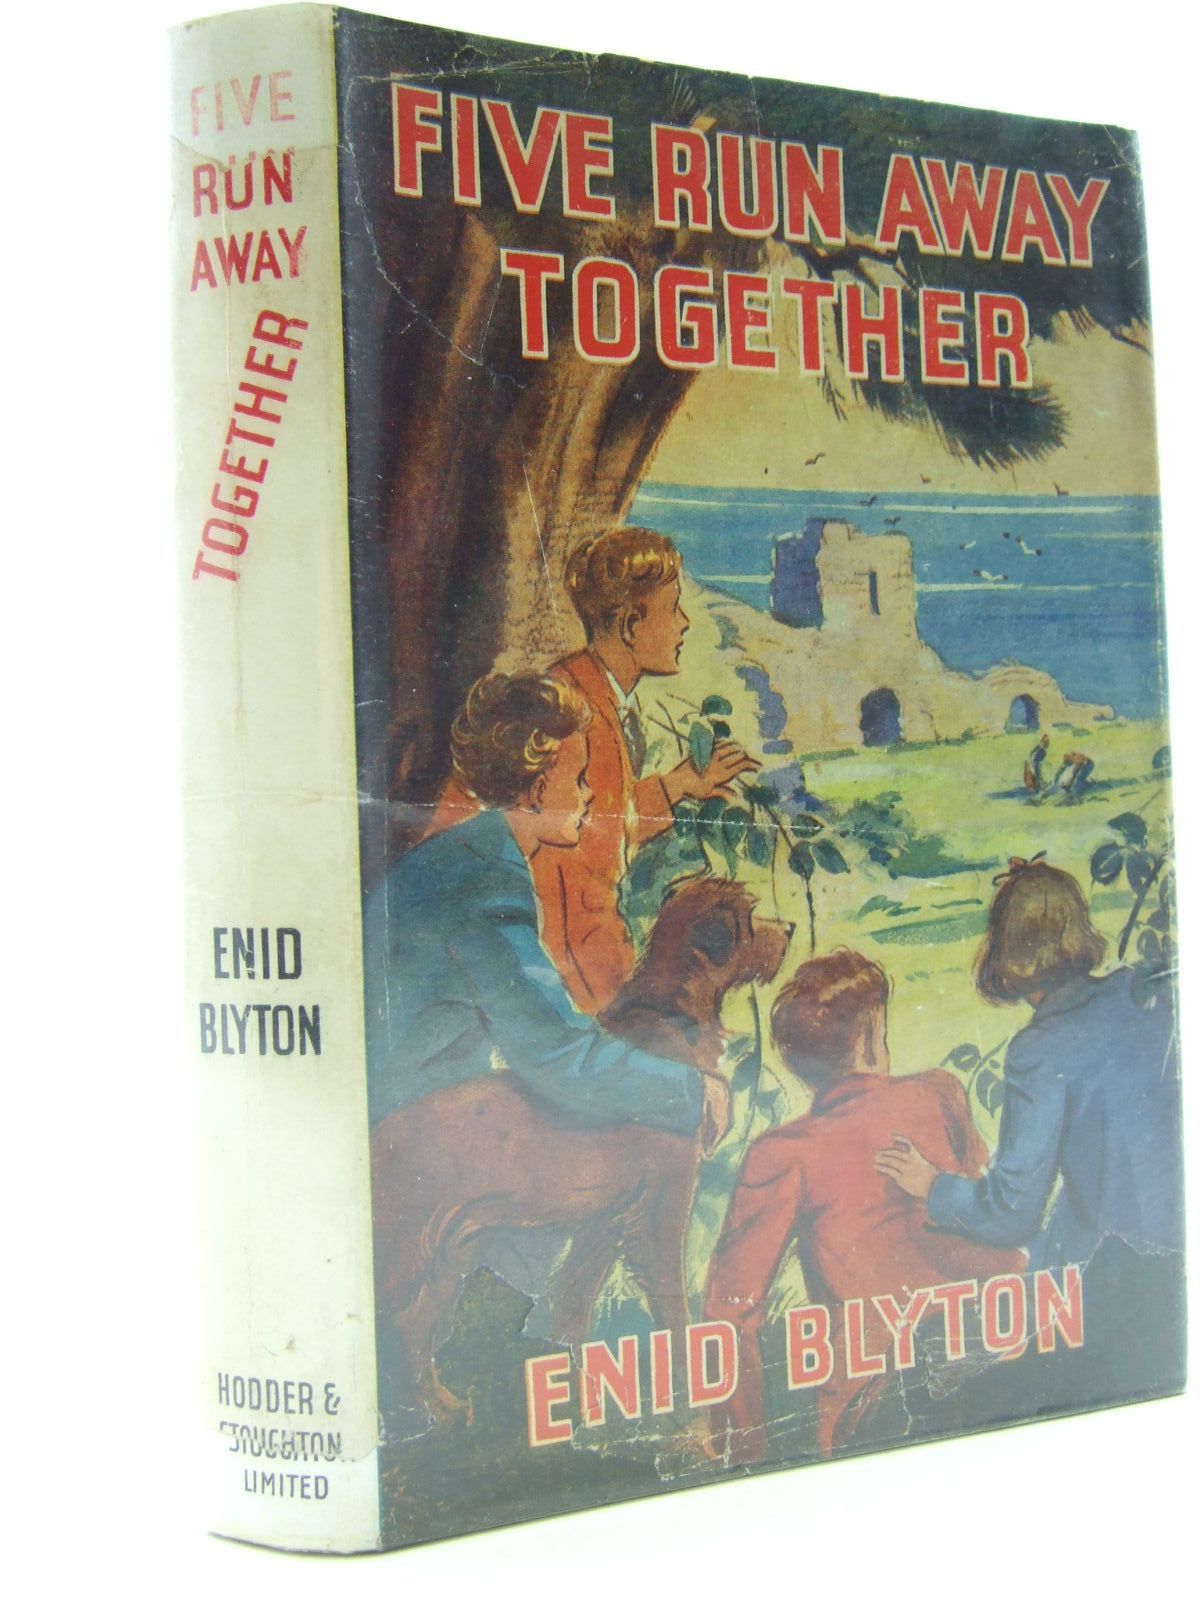 Cover of FIVE RUN AWAY TOGETHER by Enid Blyton